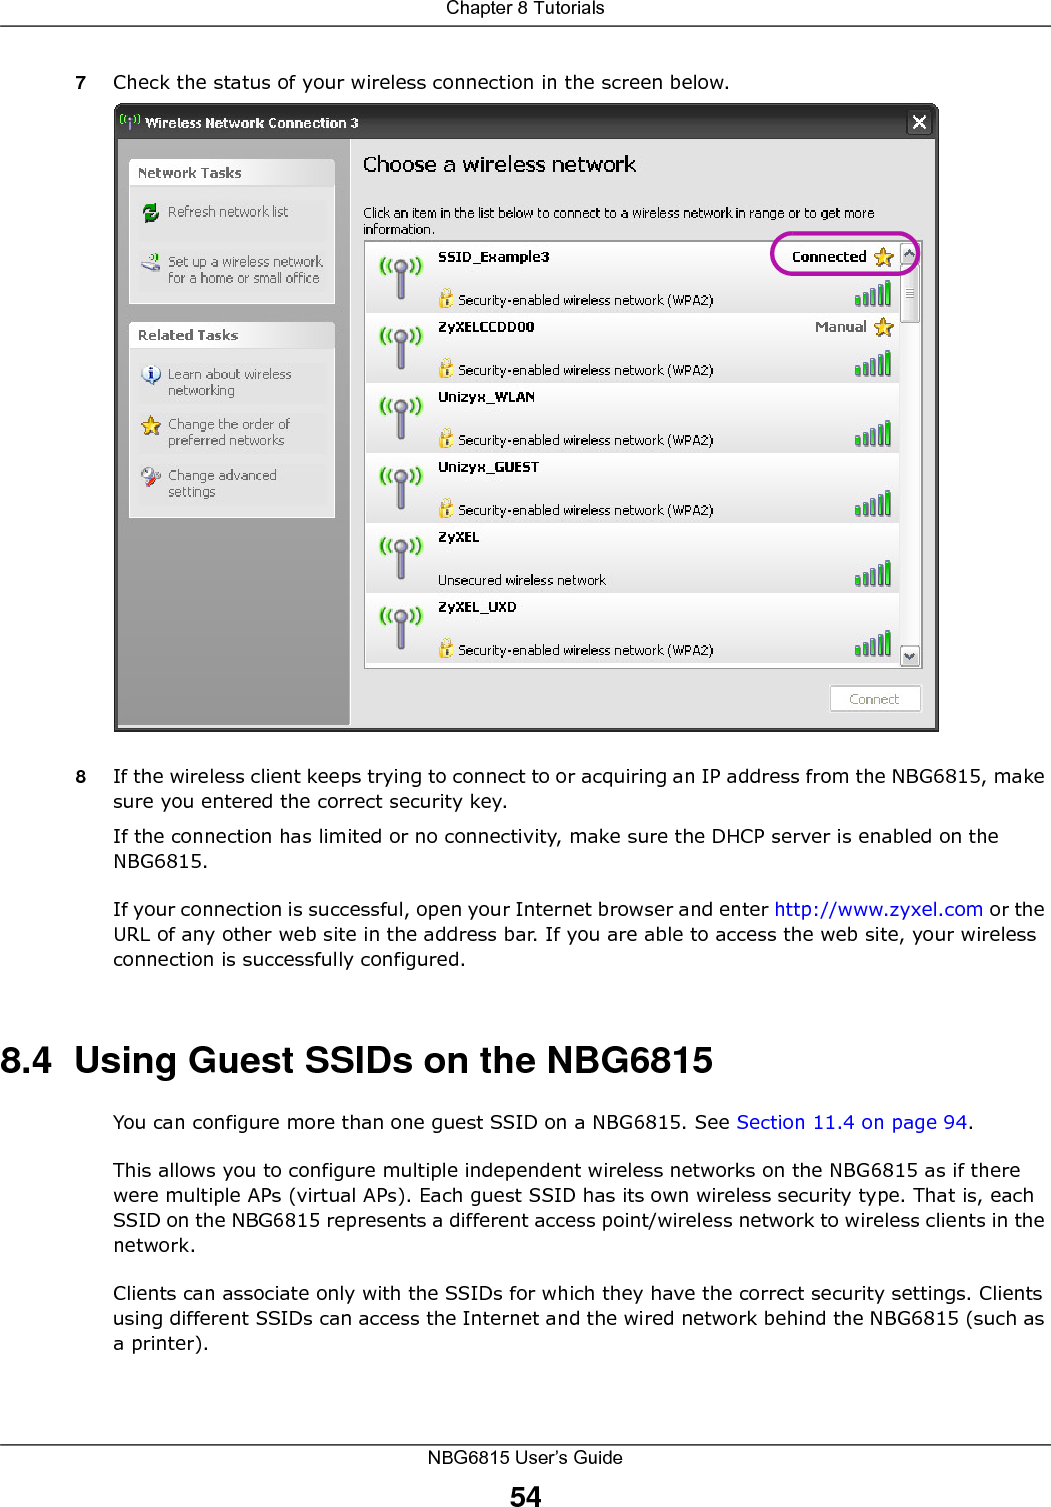 Chapter 8 TutorialsNBG6815 User’s Guide547Check the status of your wireless connection in the screen below.  8If the wireless client keeps trying to connect to or acquiring an IP address from the NBG6815, make sure you entered the correct security key.If the connection has limited or no connectivity, make sure the DHCP server is enabled on the NBG6815.If your connection is successful, open your Internet browser and enter http://www.zyxel.com or the URL of any other web site in the address bar. If you are able to access the web site, your wireless connection is successfully configured.8.4  Using Guest SSIDs on the NBG6815You can configure more than one guest SSID on a NBG6815. See Section 11.4 on page 94. This allows you to configure multiple independent wireless networks on the NBG6815 as if there were multiple APs (virtual APs). Each guest SSID has its own wireless security type. That is, each SSID on the NBG6815 represents a different access point/wireless network to wireless clients in the network. Clients can associate only with the SSIDs for which they have the correct security settings. Clients using different SSIDs can access the Internet and the wired network behind the NBG6815 (such as a printer). 